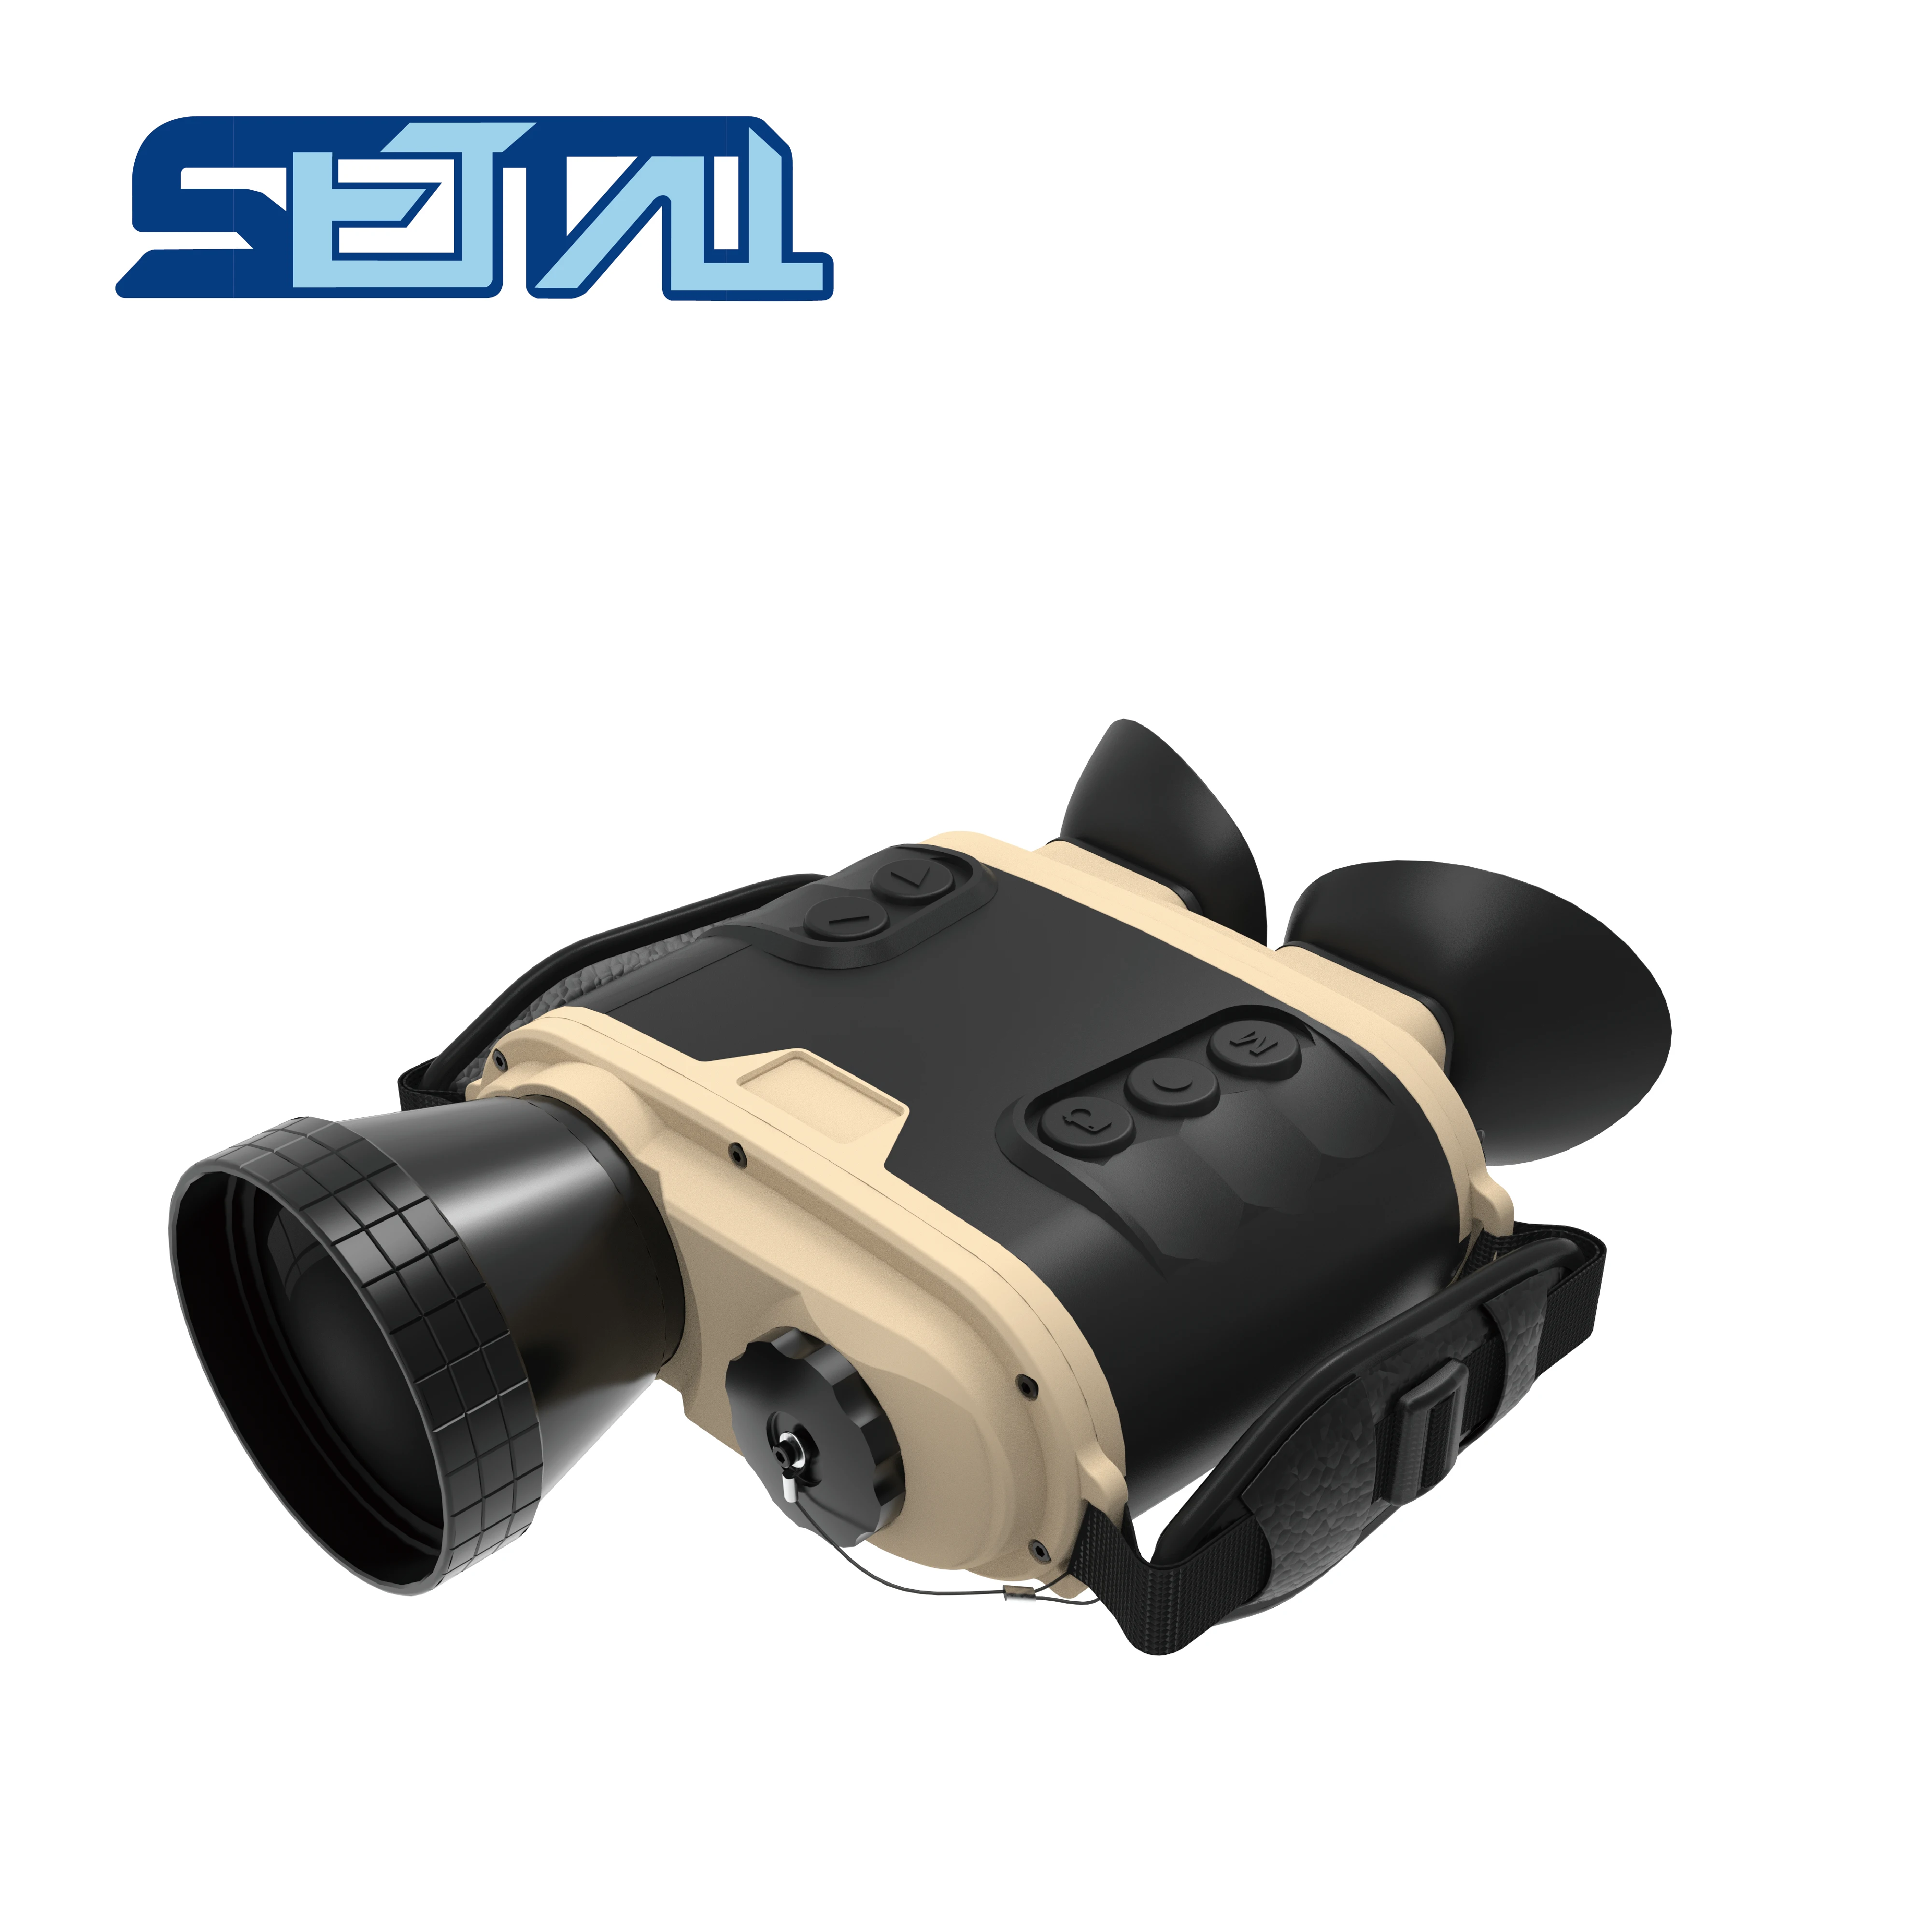 

SETTALL TH-XD Binocular Thermal Image night vision with Rangefinder Lens50mm 384X288